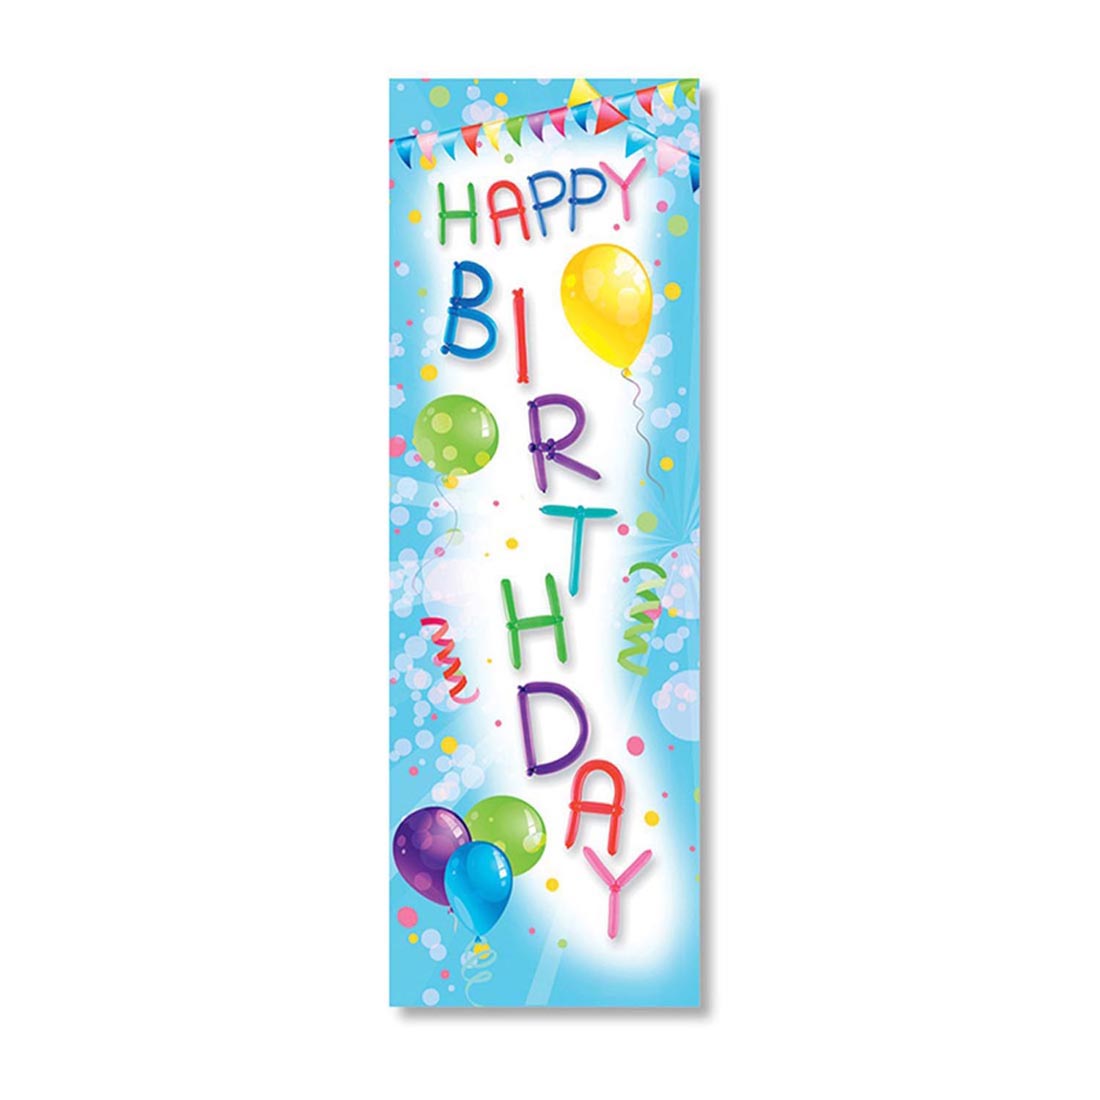 Happy Birthday Bookmarks with balloons and pennants